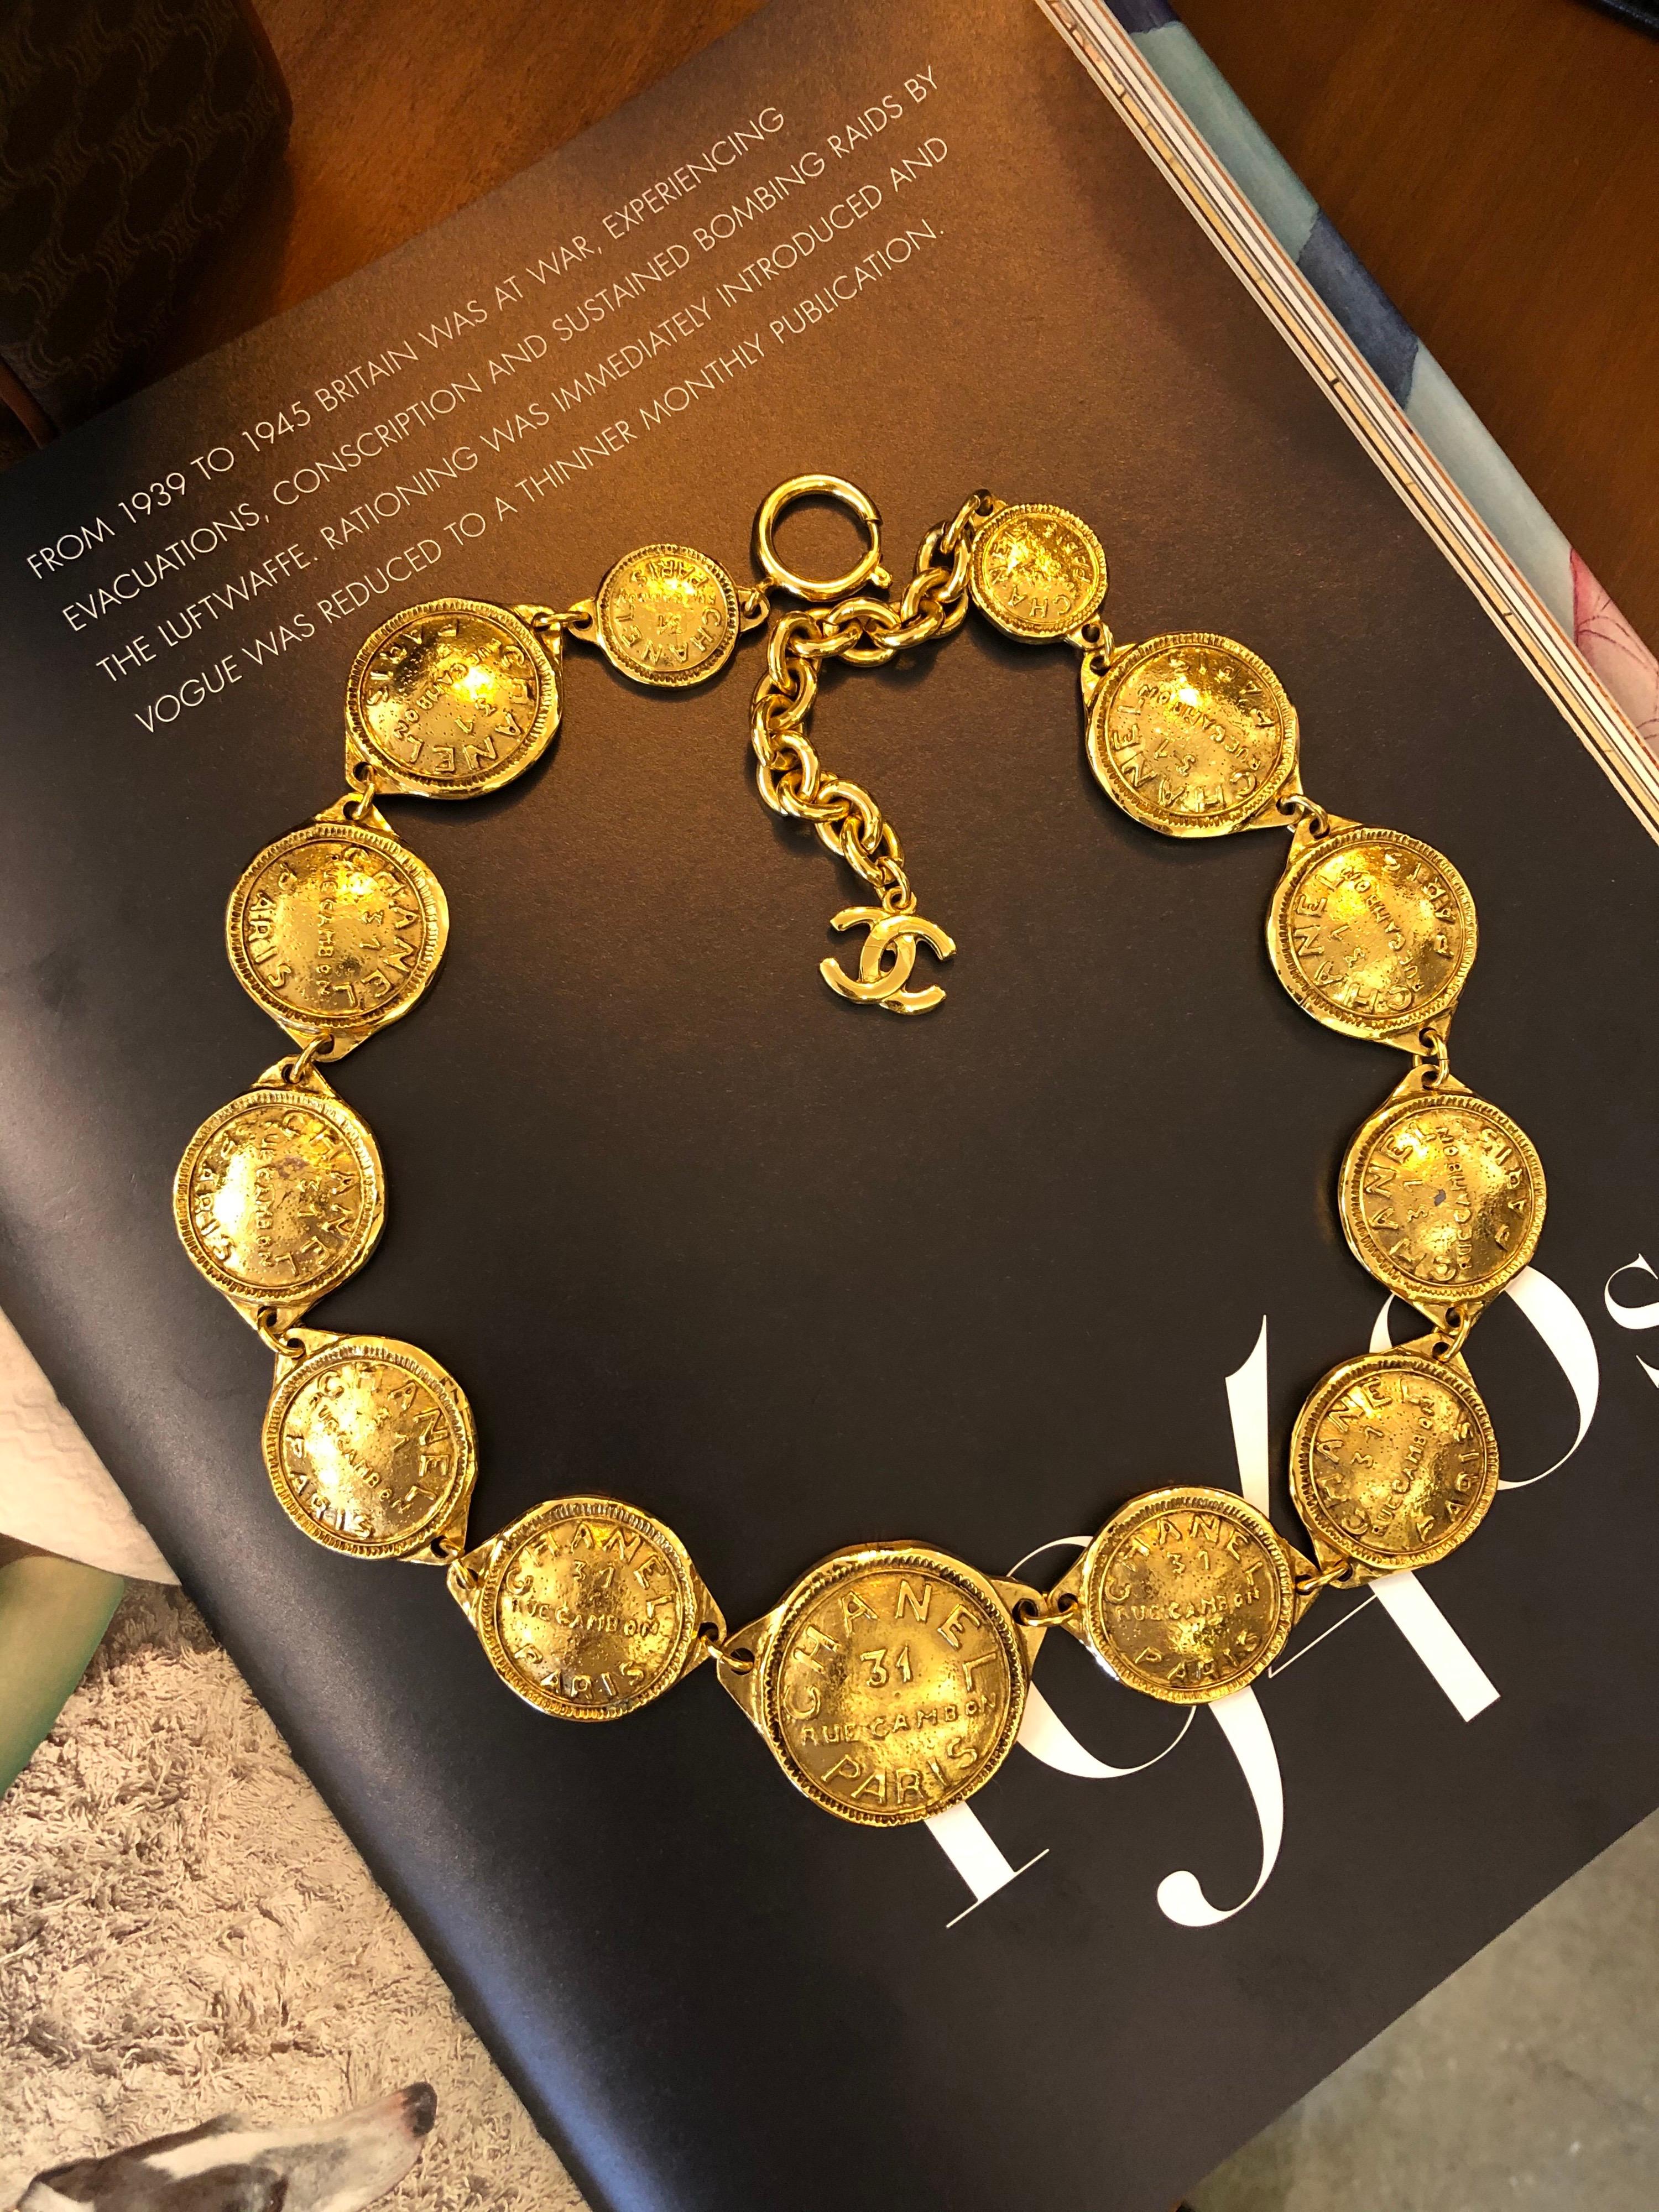 1980s Chanel gold toned necklace featuring 13 gold toned 31 Rue Cambon Paris coins. Measures approximately 56cm Biggest Coin 4.2 x 3.4cm. Stamped Chanel, made in France. 

Condition: Minor signs of wear consistent with age. Generally in good